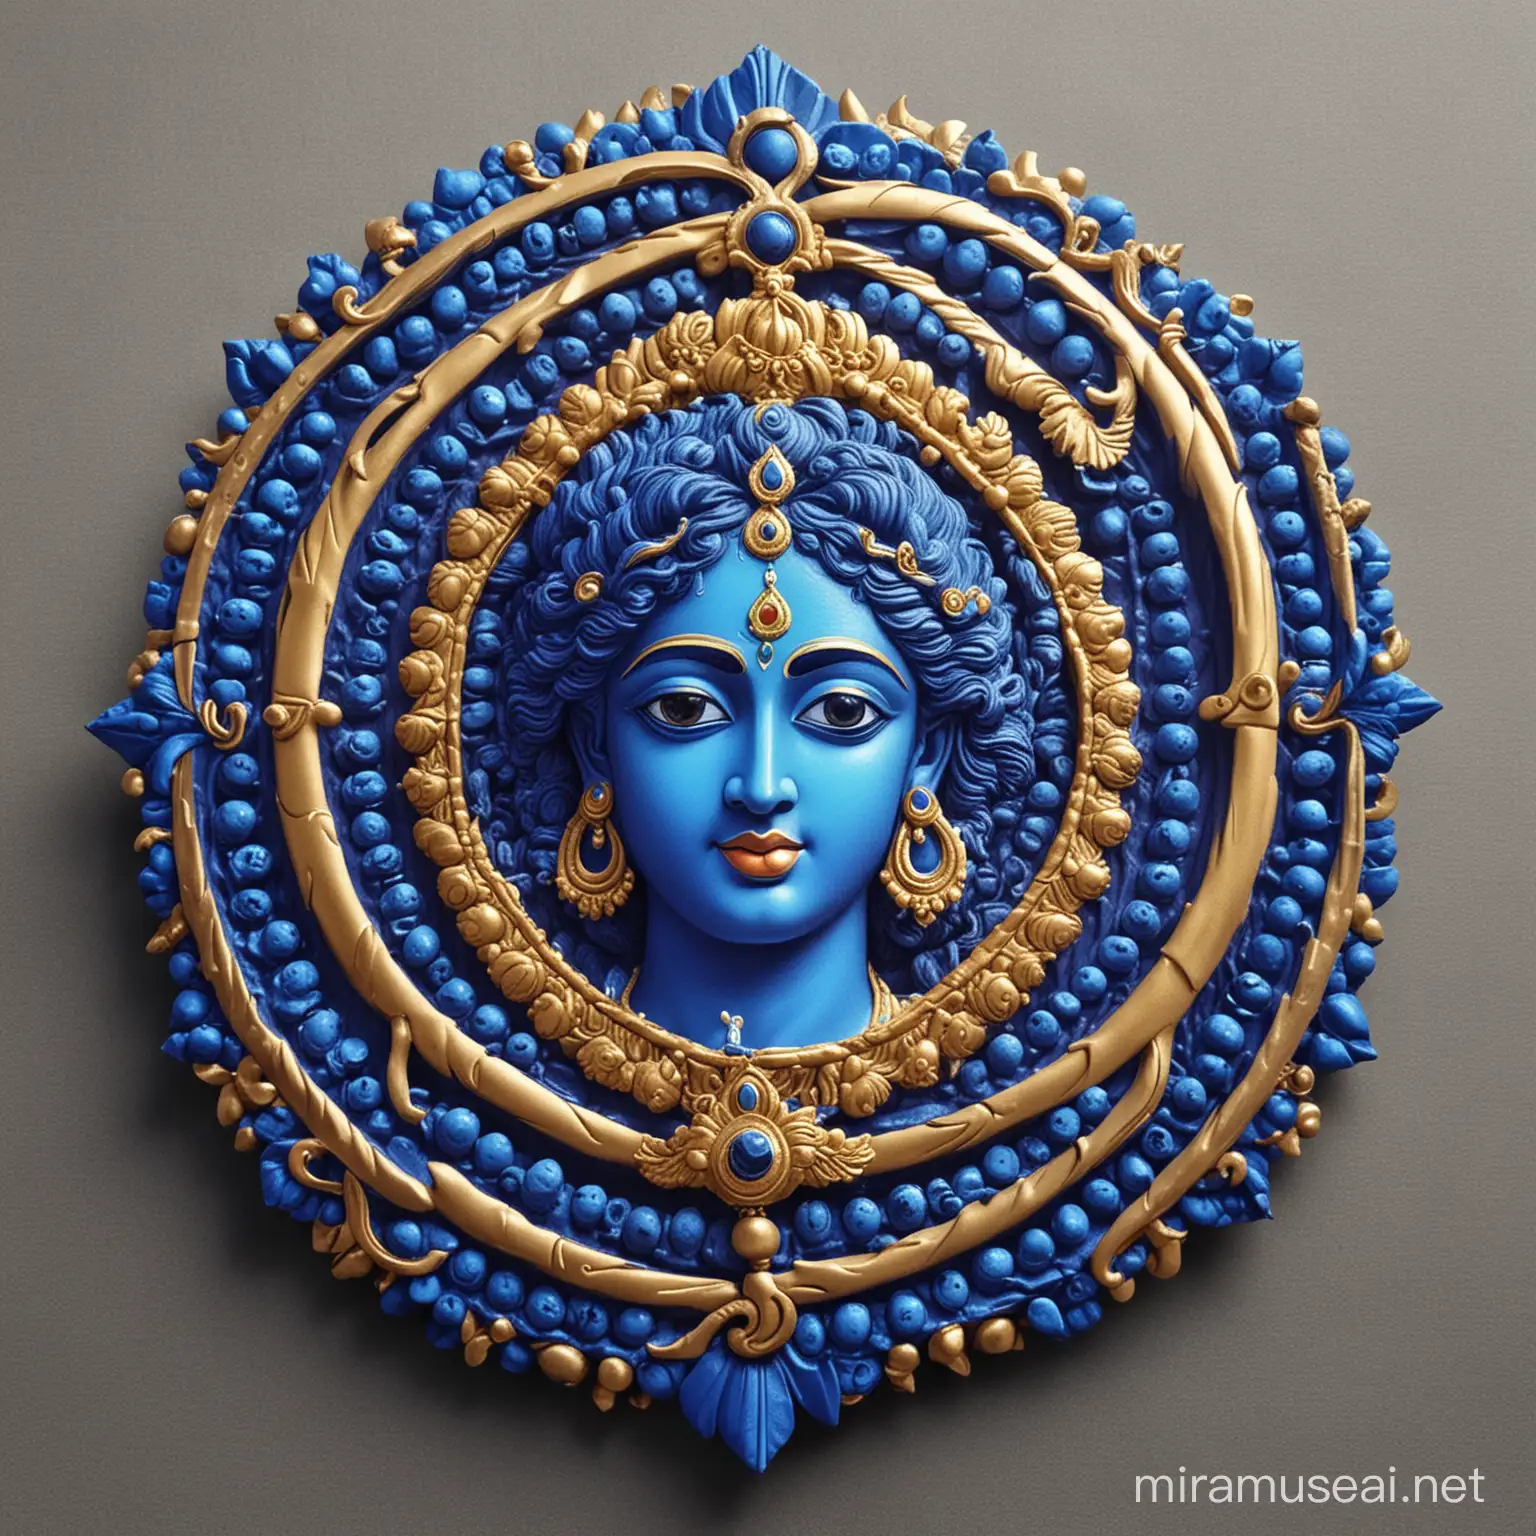 logo name 'KRUSHNA DARSHAN INDUSTRIES LLP'add lord krishna image and add color blue and golden make a unique logo design